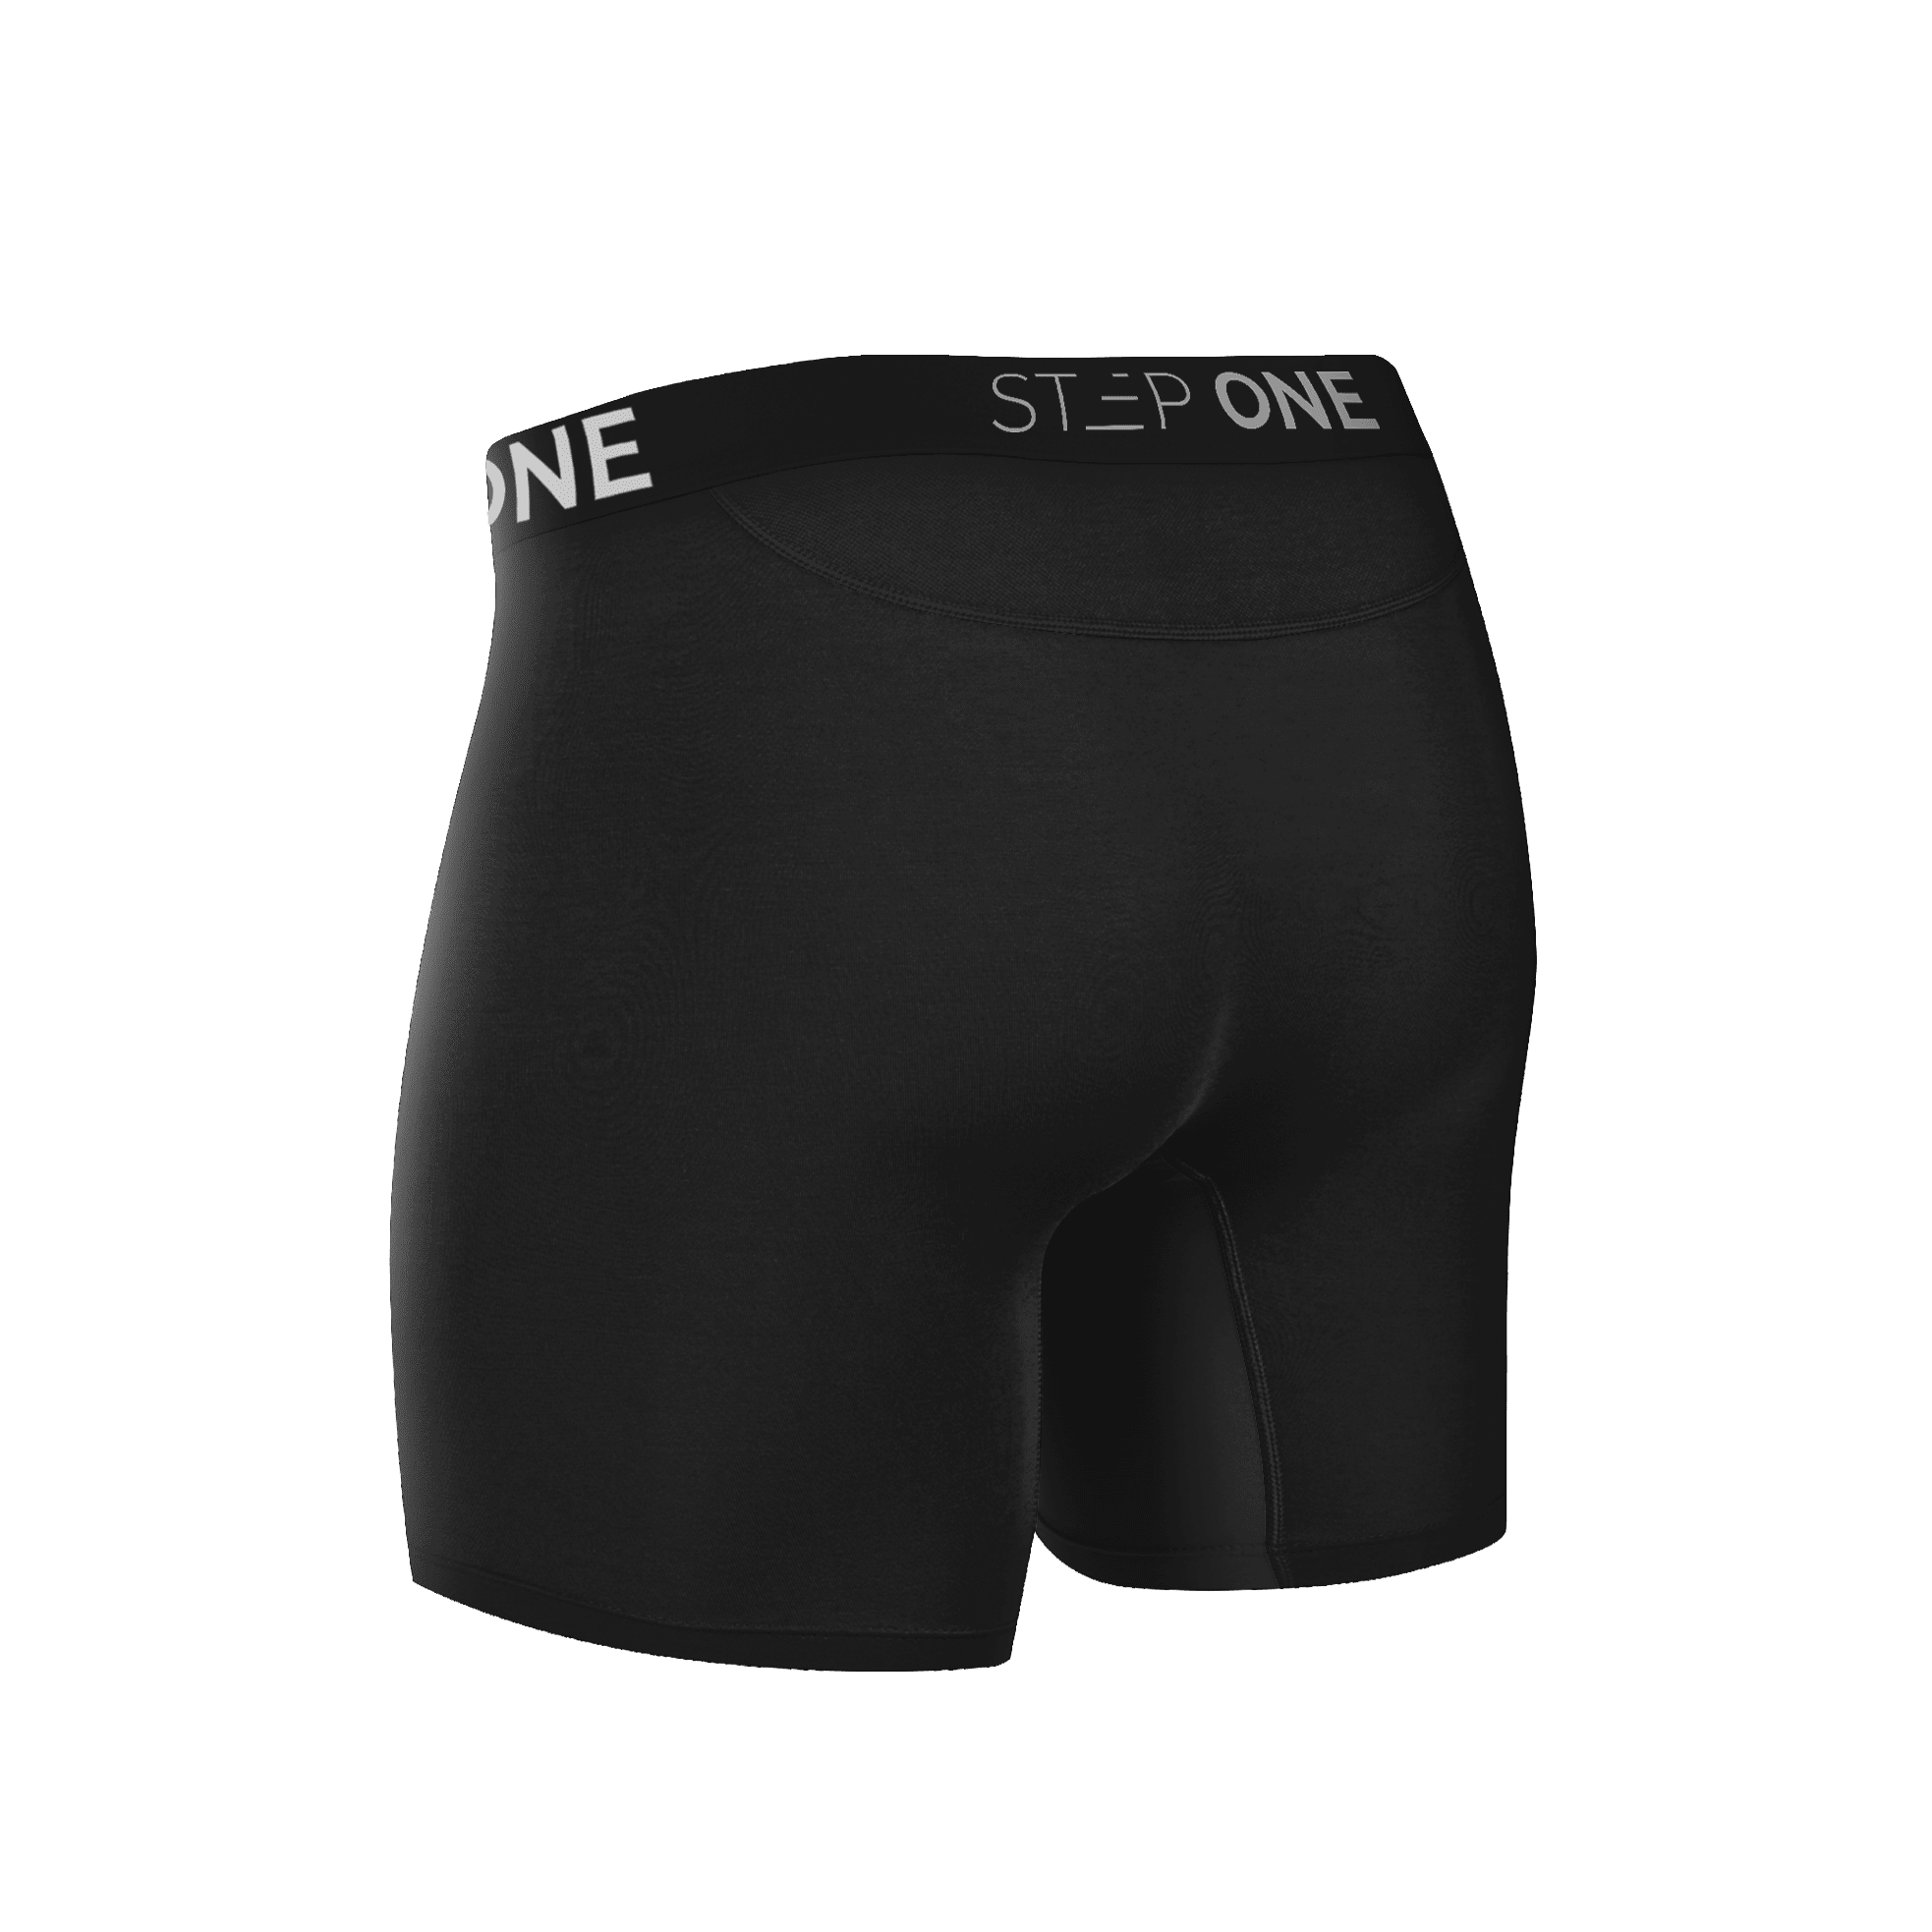 STEP ONE New Mens Trunks (Shorter) Bamboo Underwear- Limited Editions